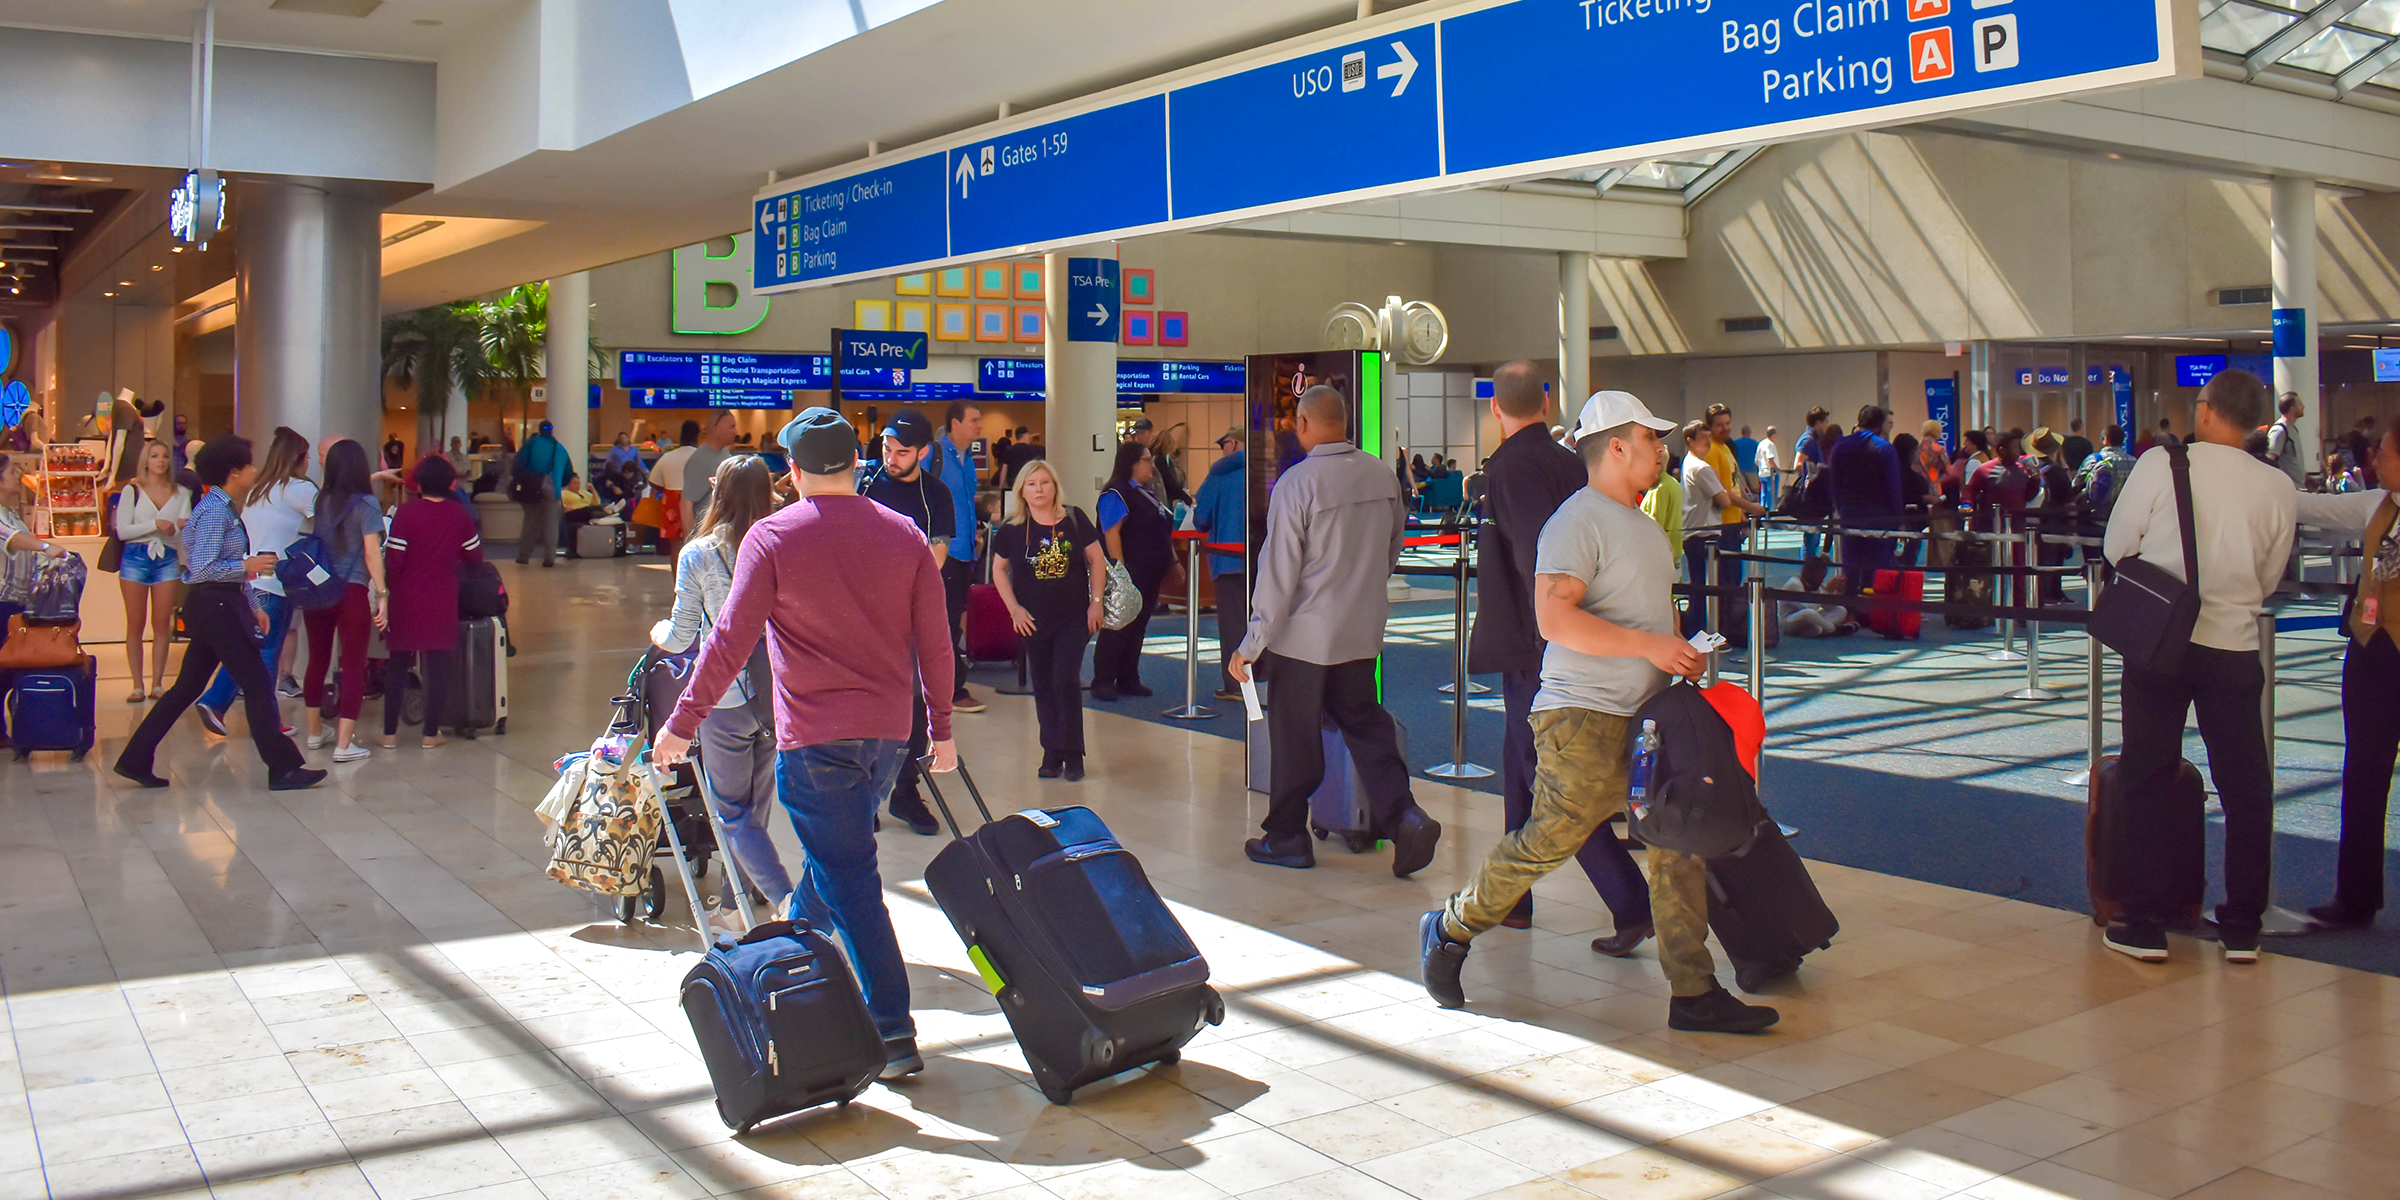 Travelers strolling through the airport | Source: Shutterstock